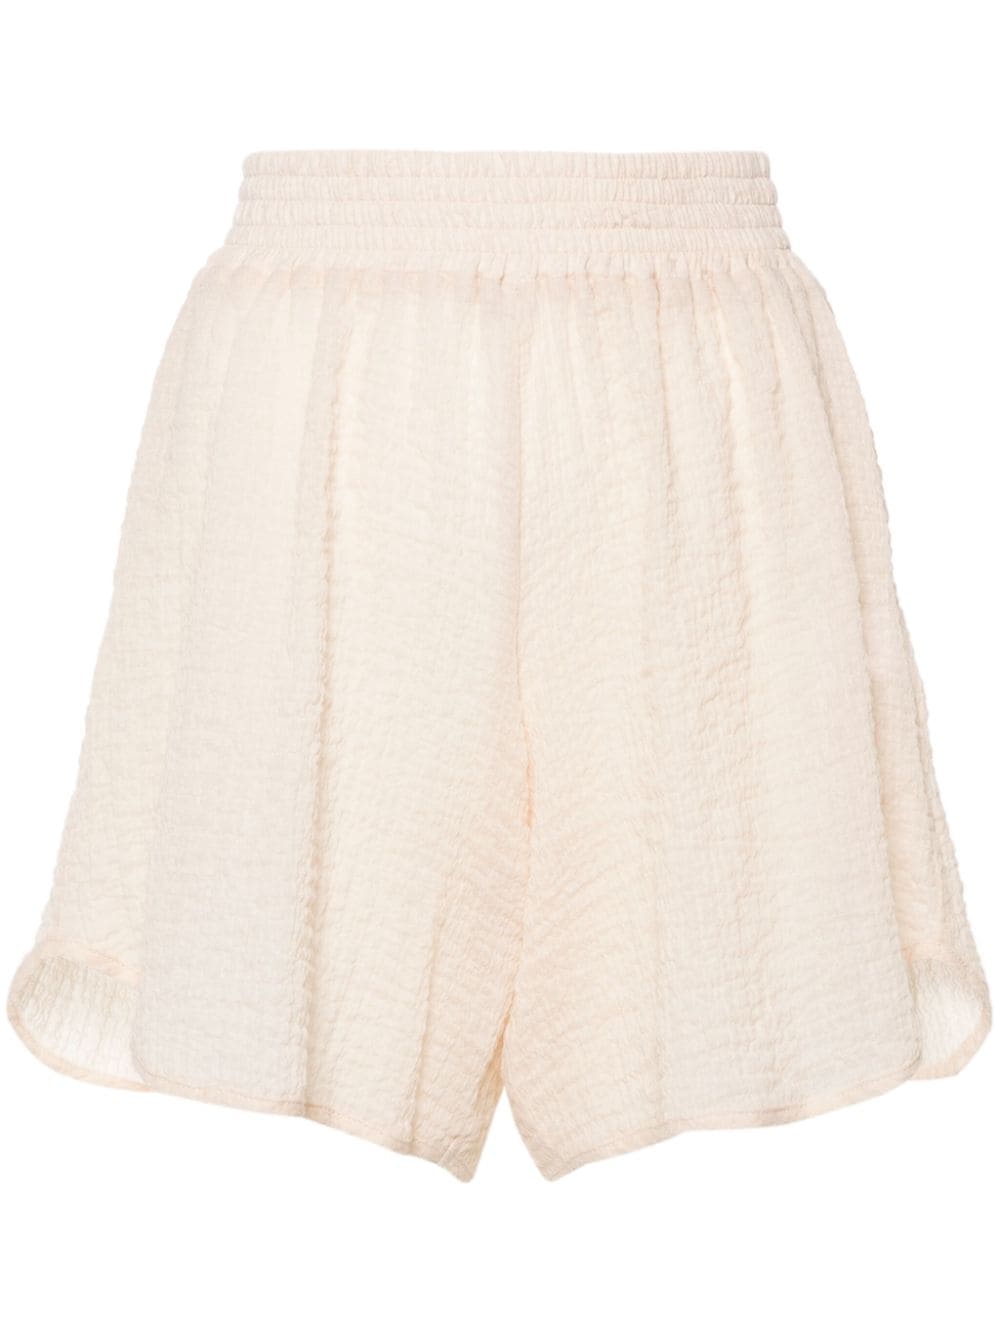 Amotea Kloe Cheesecloth Cotton Shorts In Neutrals